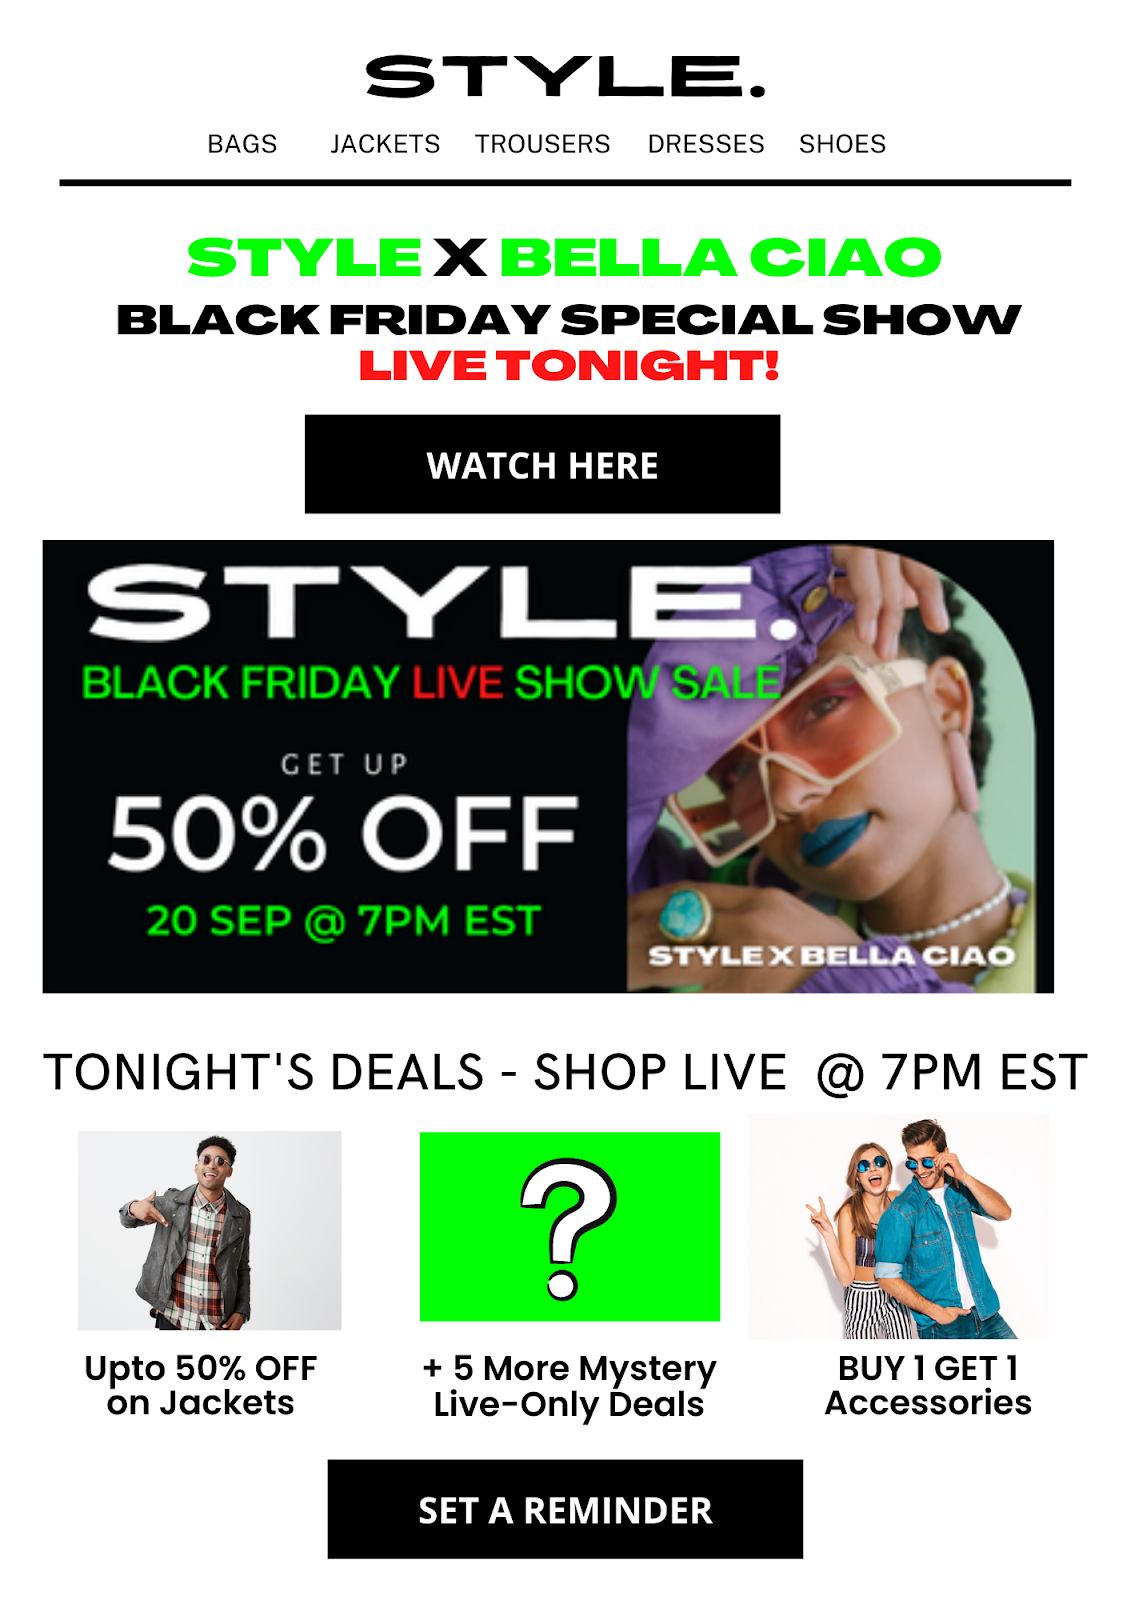 Show insights Emailer for Live shopping shows